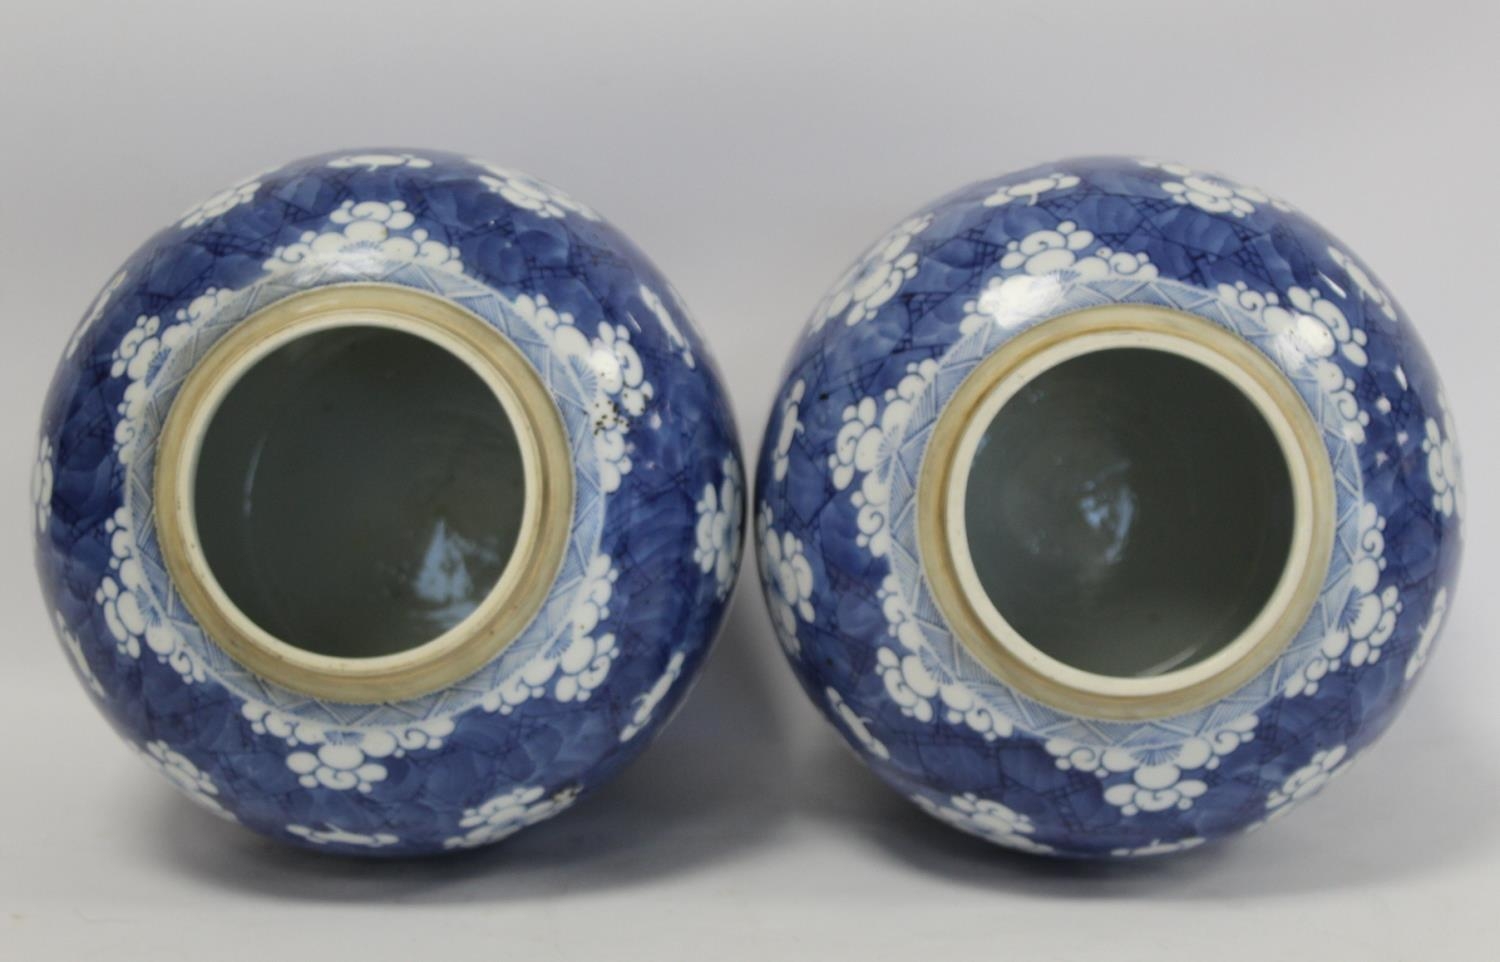 Pair of 19th century Chinese porcelain covered ginger jars of ovoid form with underglaze blue - Image 7 of 28